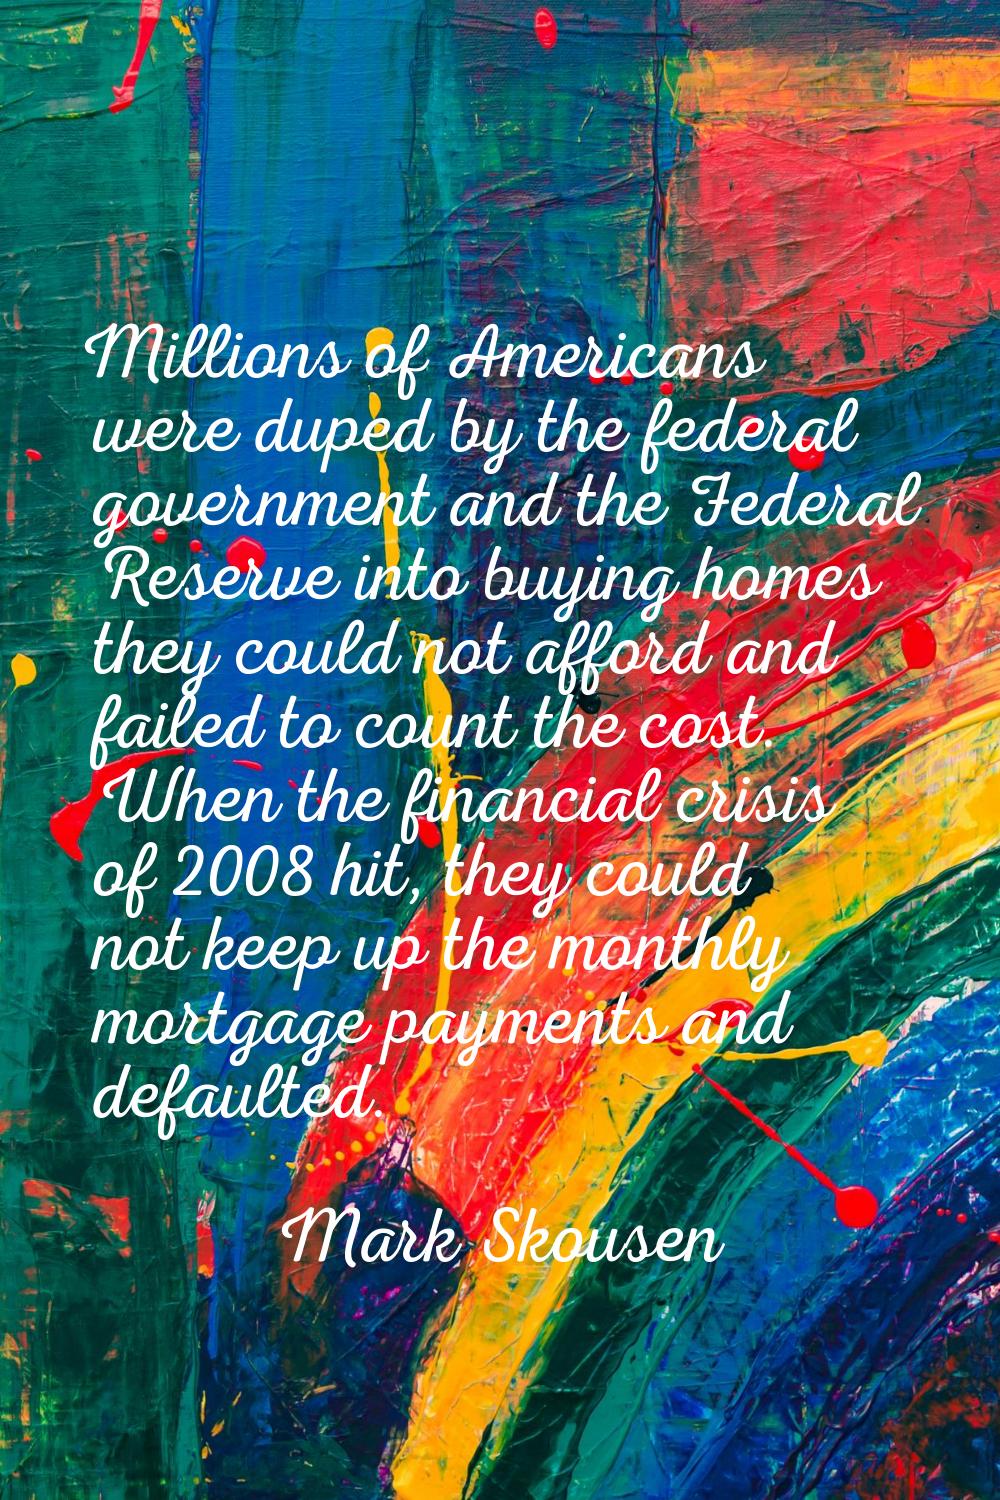 Millions of Americans were duped by the federal government and the Federal Reserve into buying home